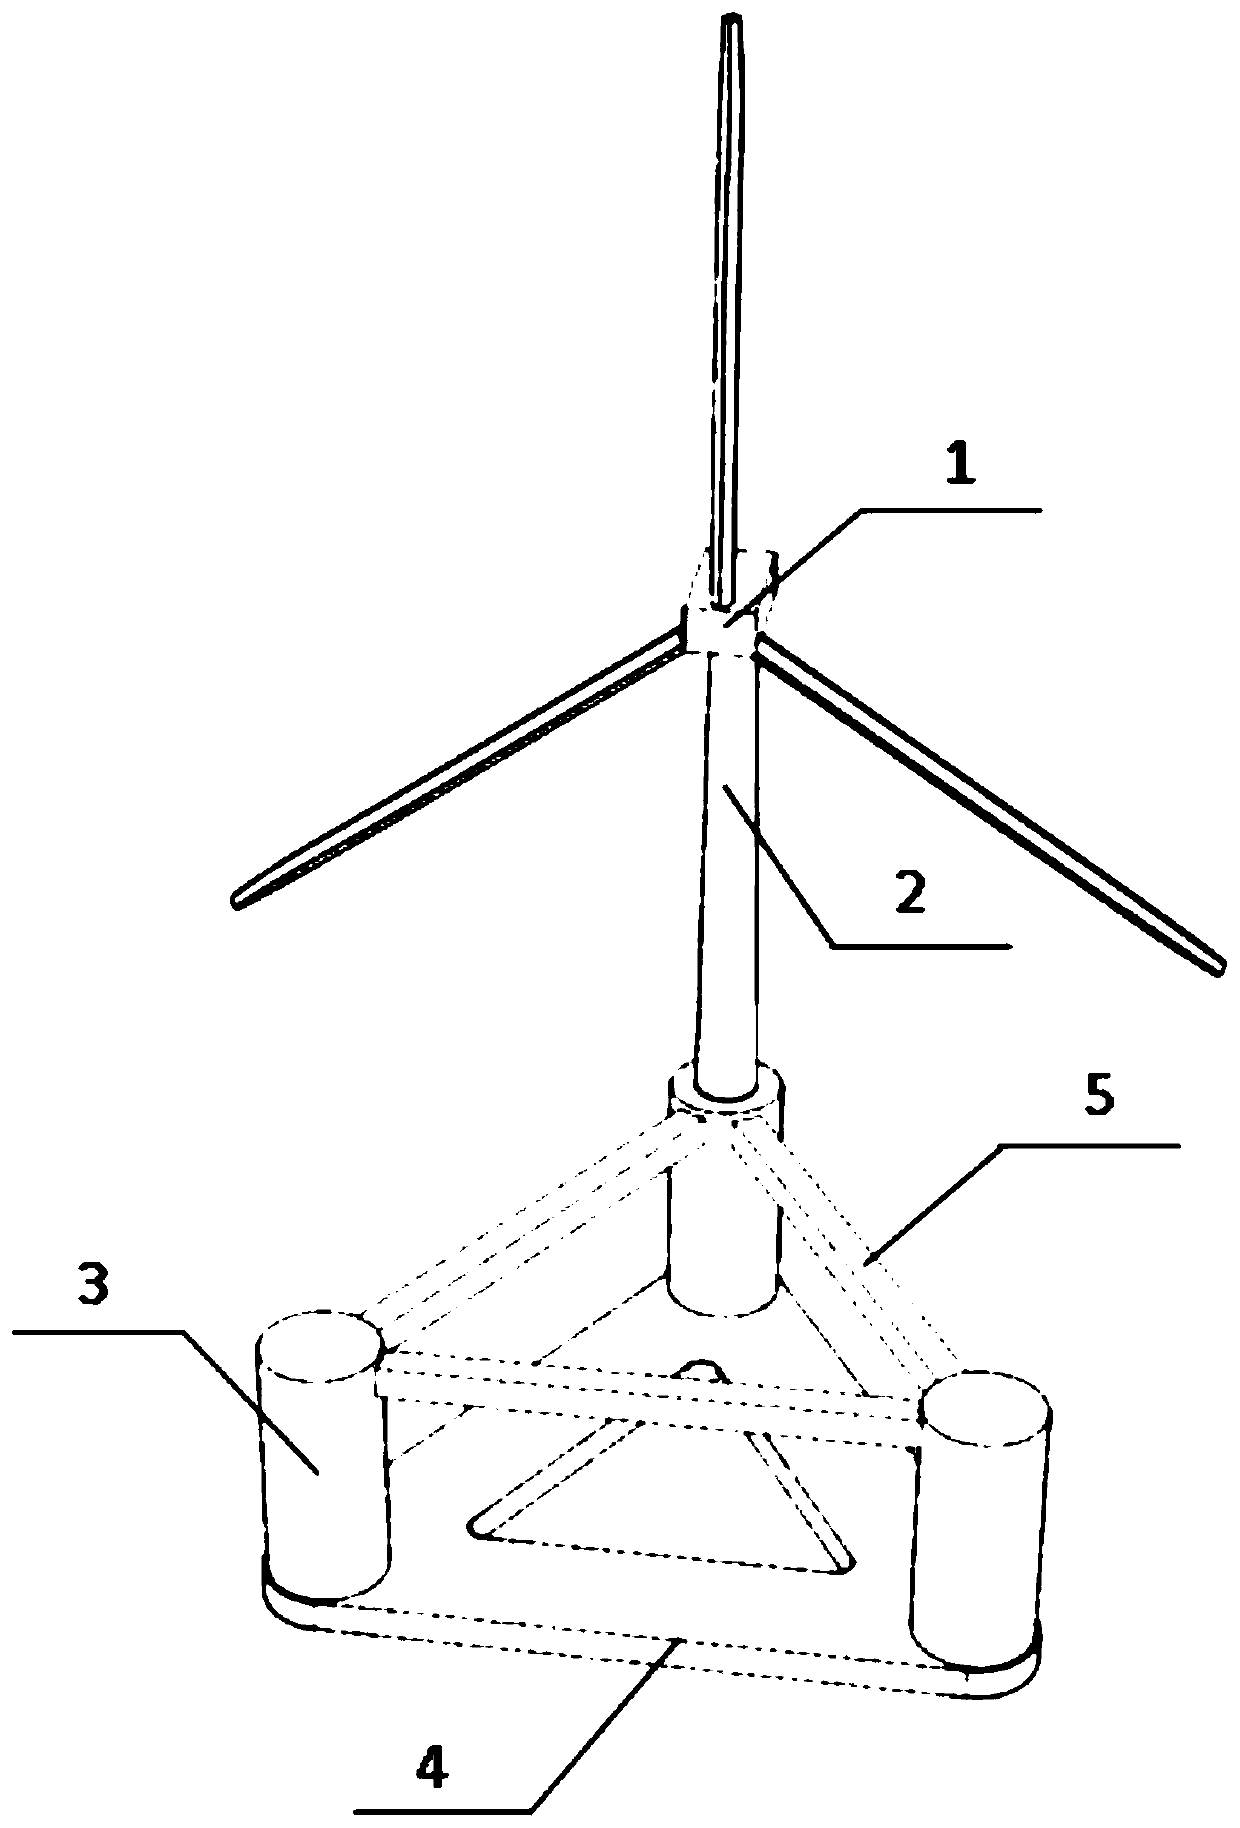 Semi-submersible high-power offshore floating type wind power platform with flat lower floating bodies